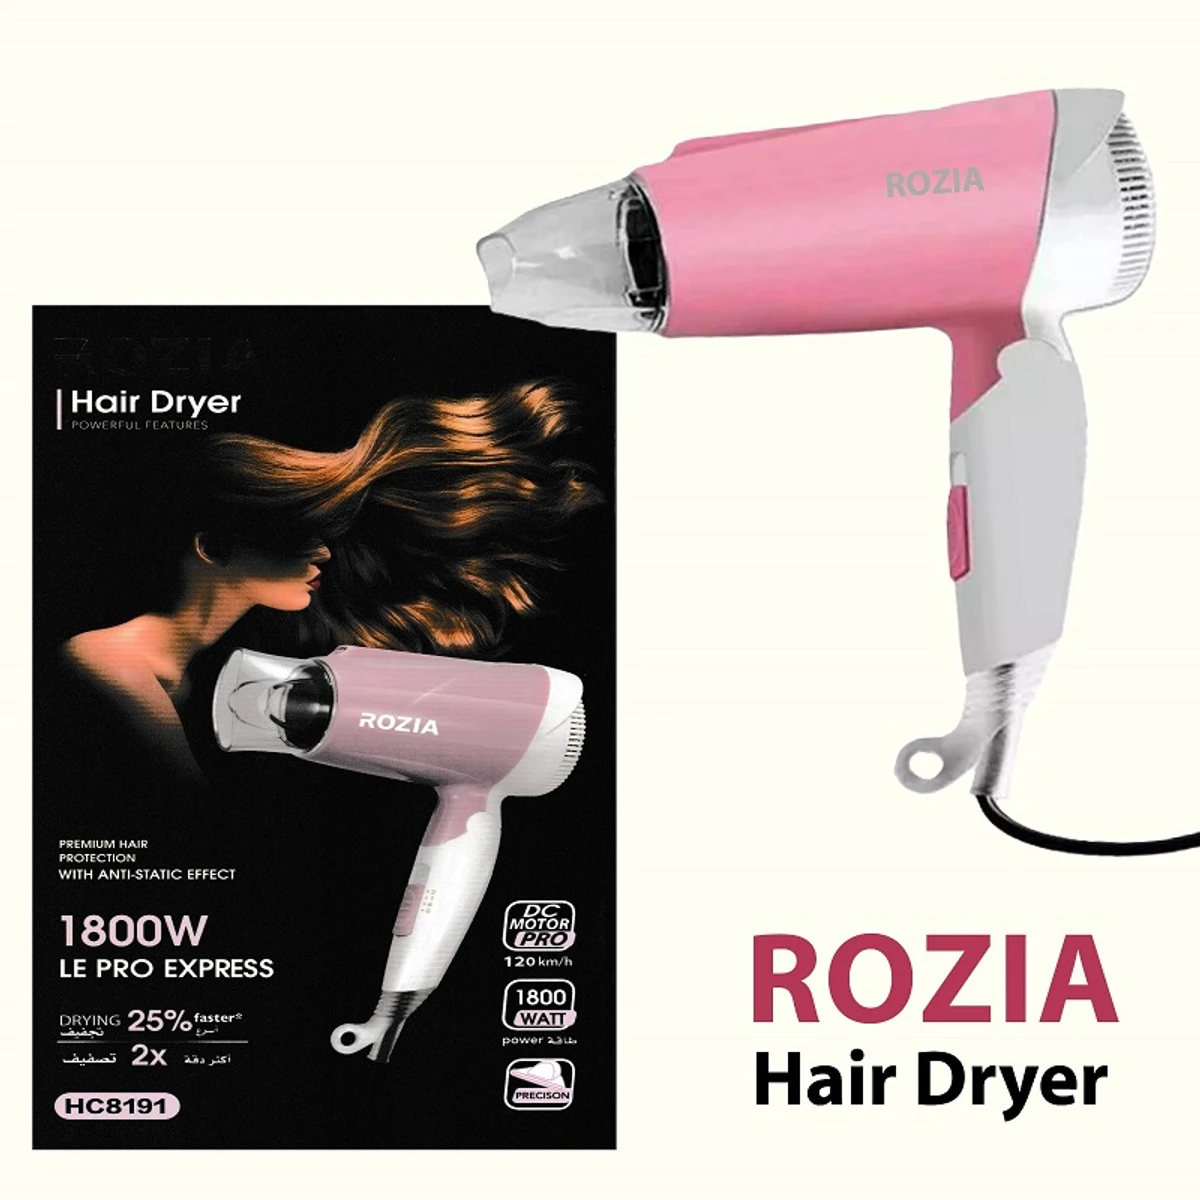 Rozia Hair Dryer with Folding Handle (HC8191)